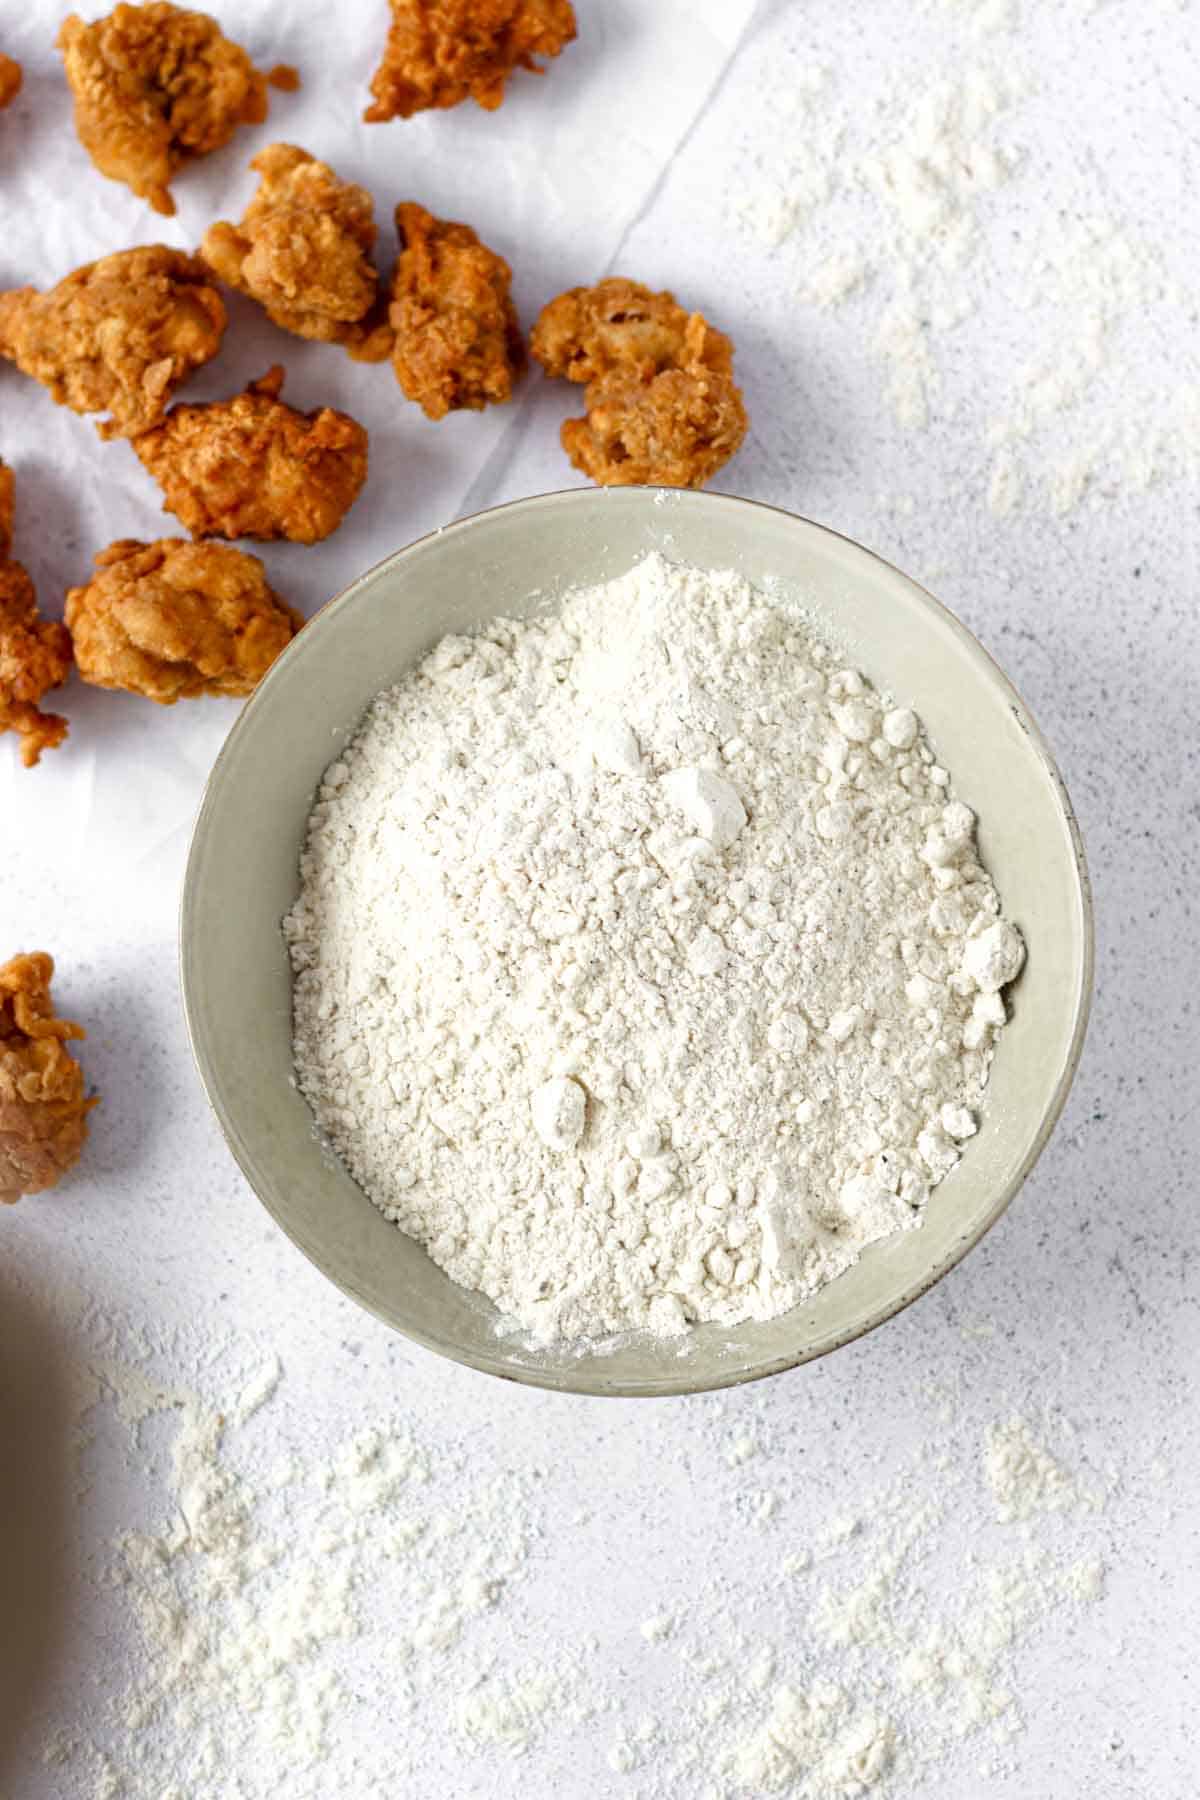 korean fried chicken frying mix in a white bowl